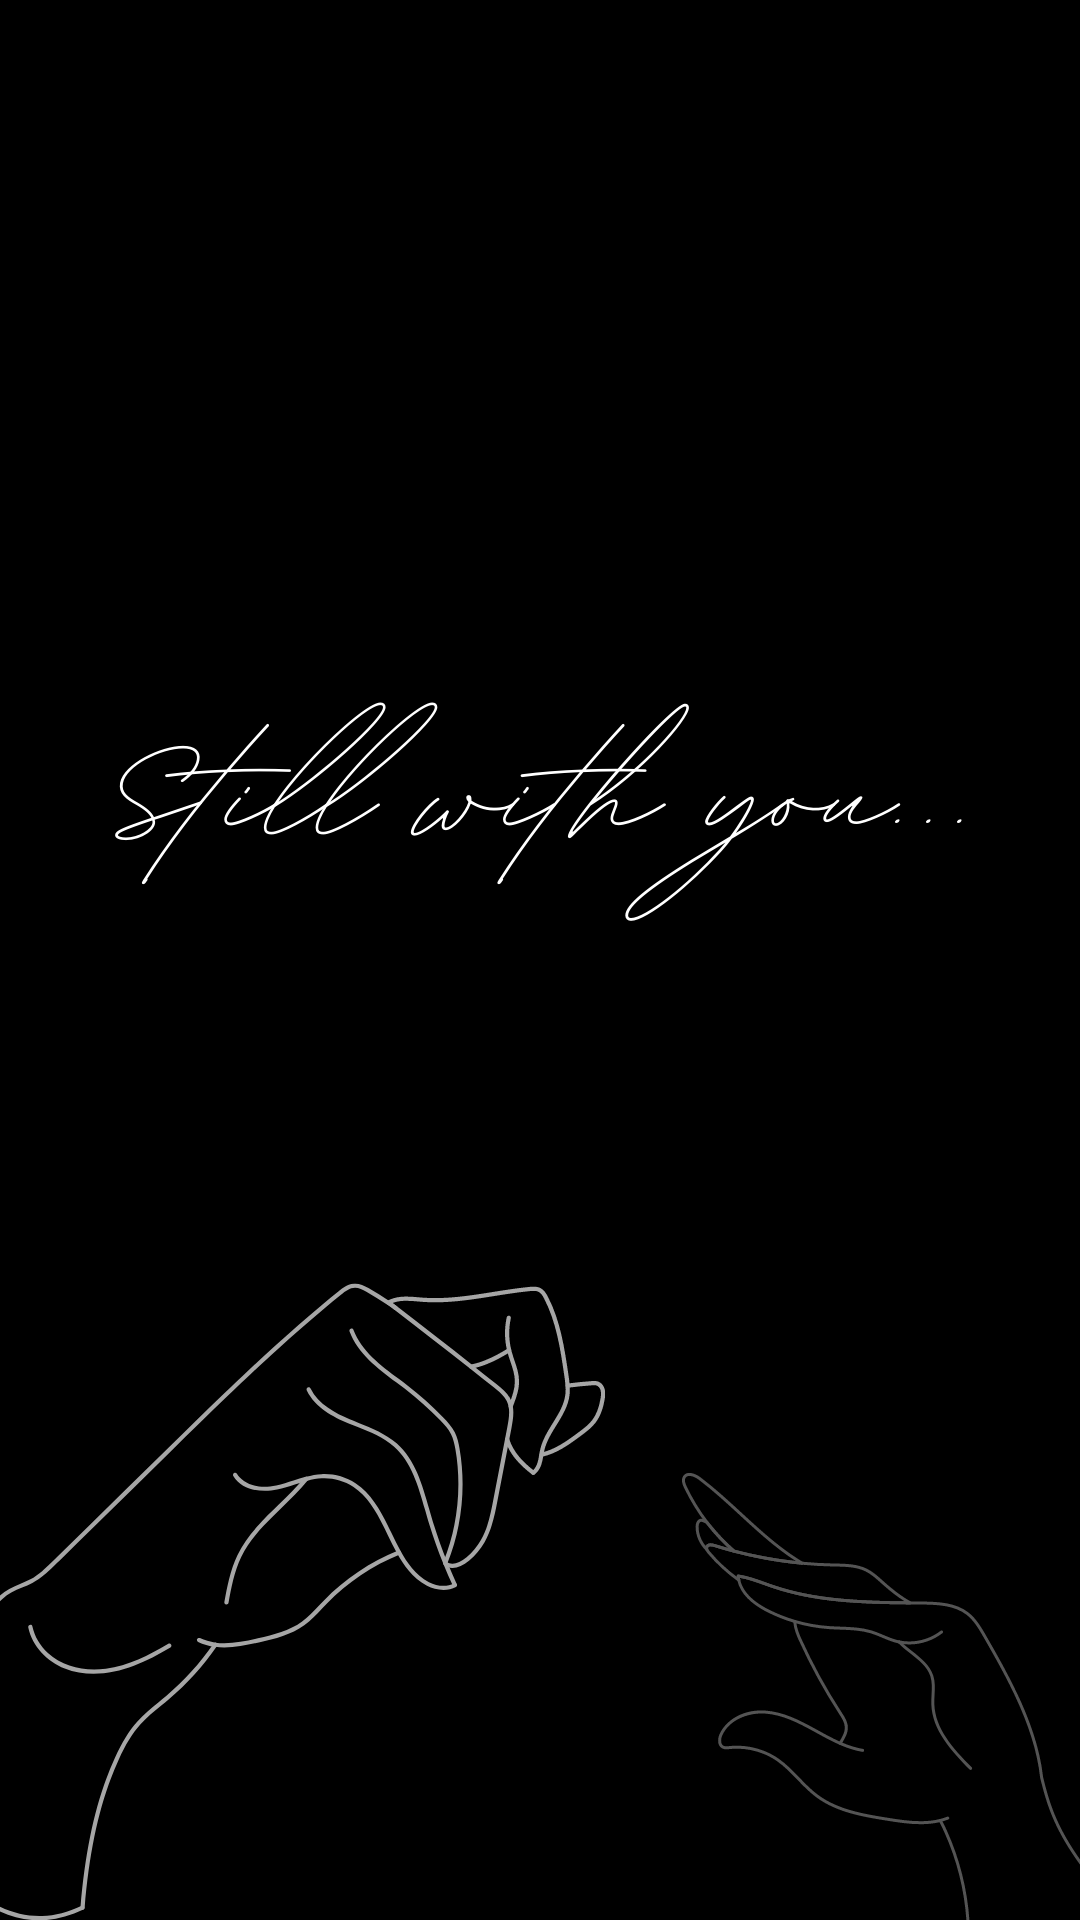 Still with you aesthetic dark wallpaper for iphone lock screen and home screen. Dark wallpaper, Simple phone wallpaper, Dark phone wallpaper